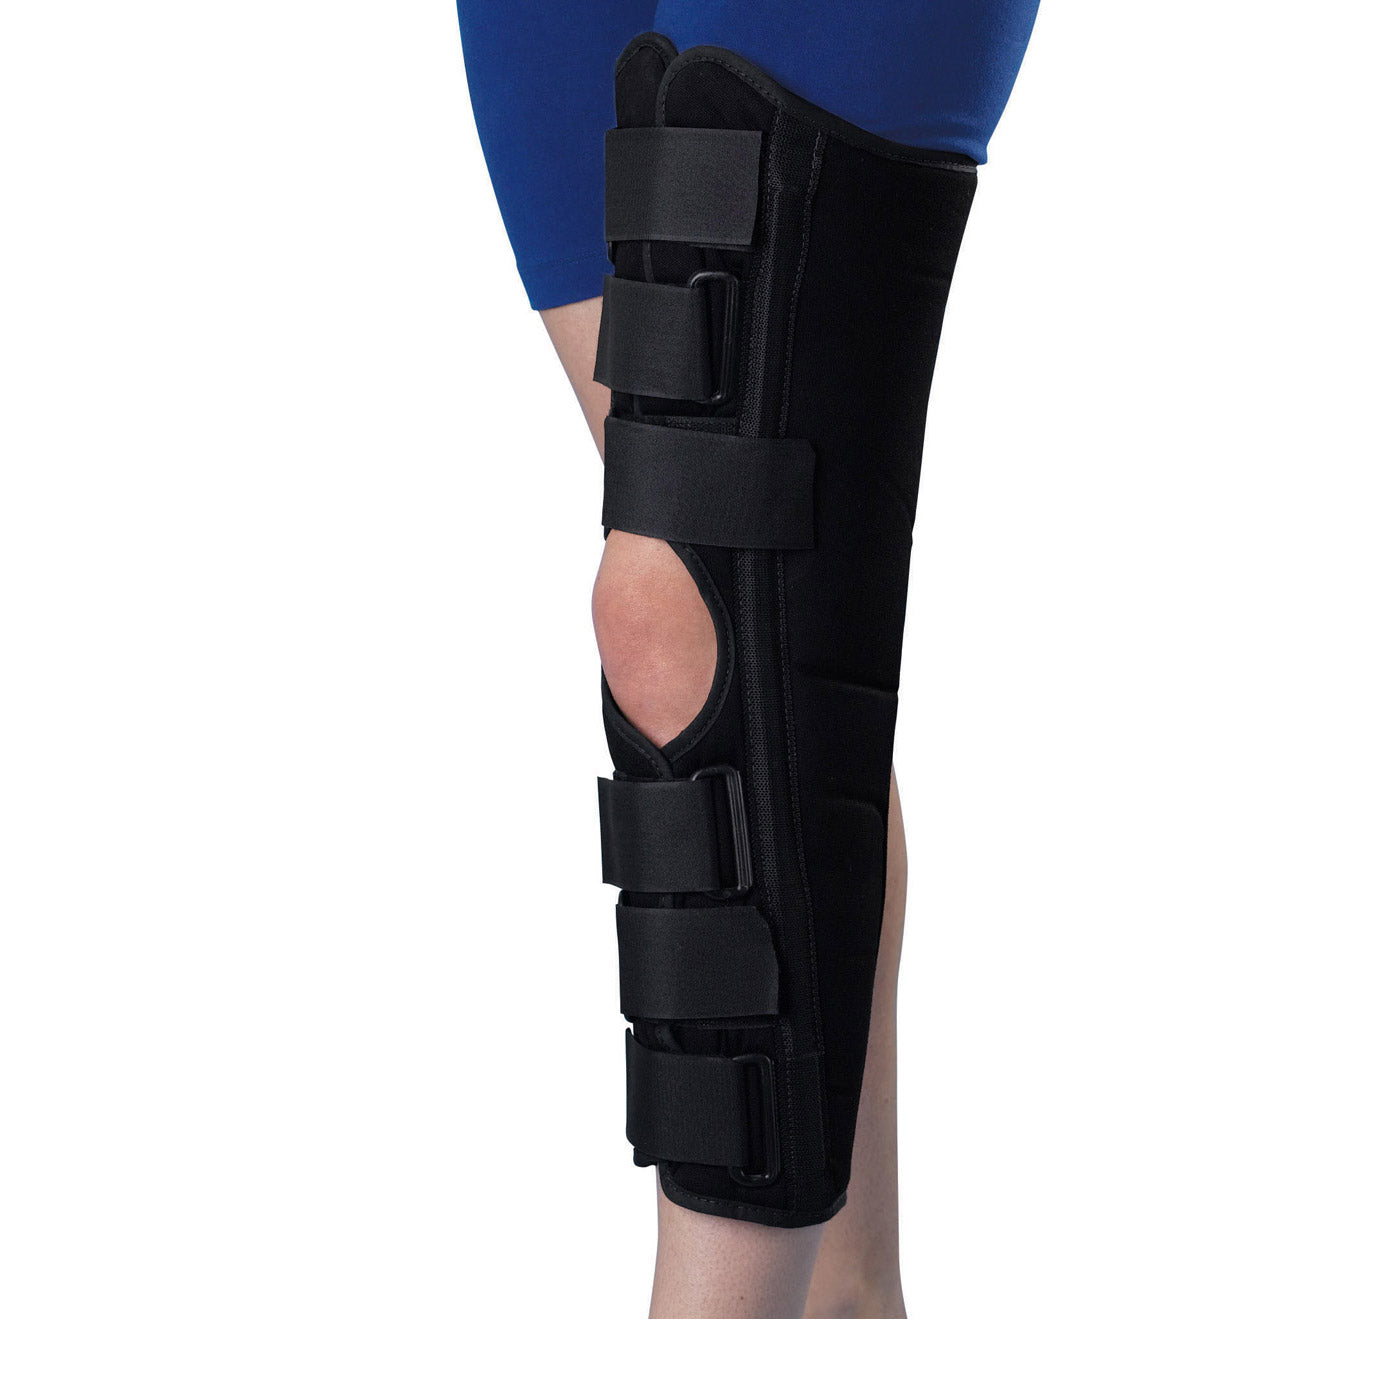 Immobilizer Knee Deluxe 16  LG